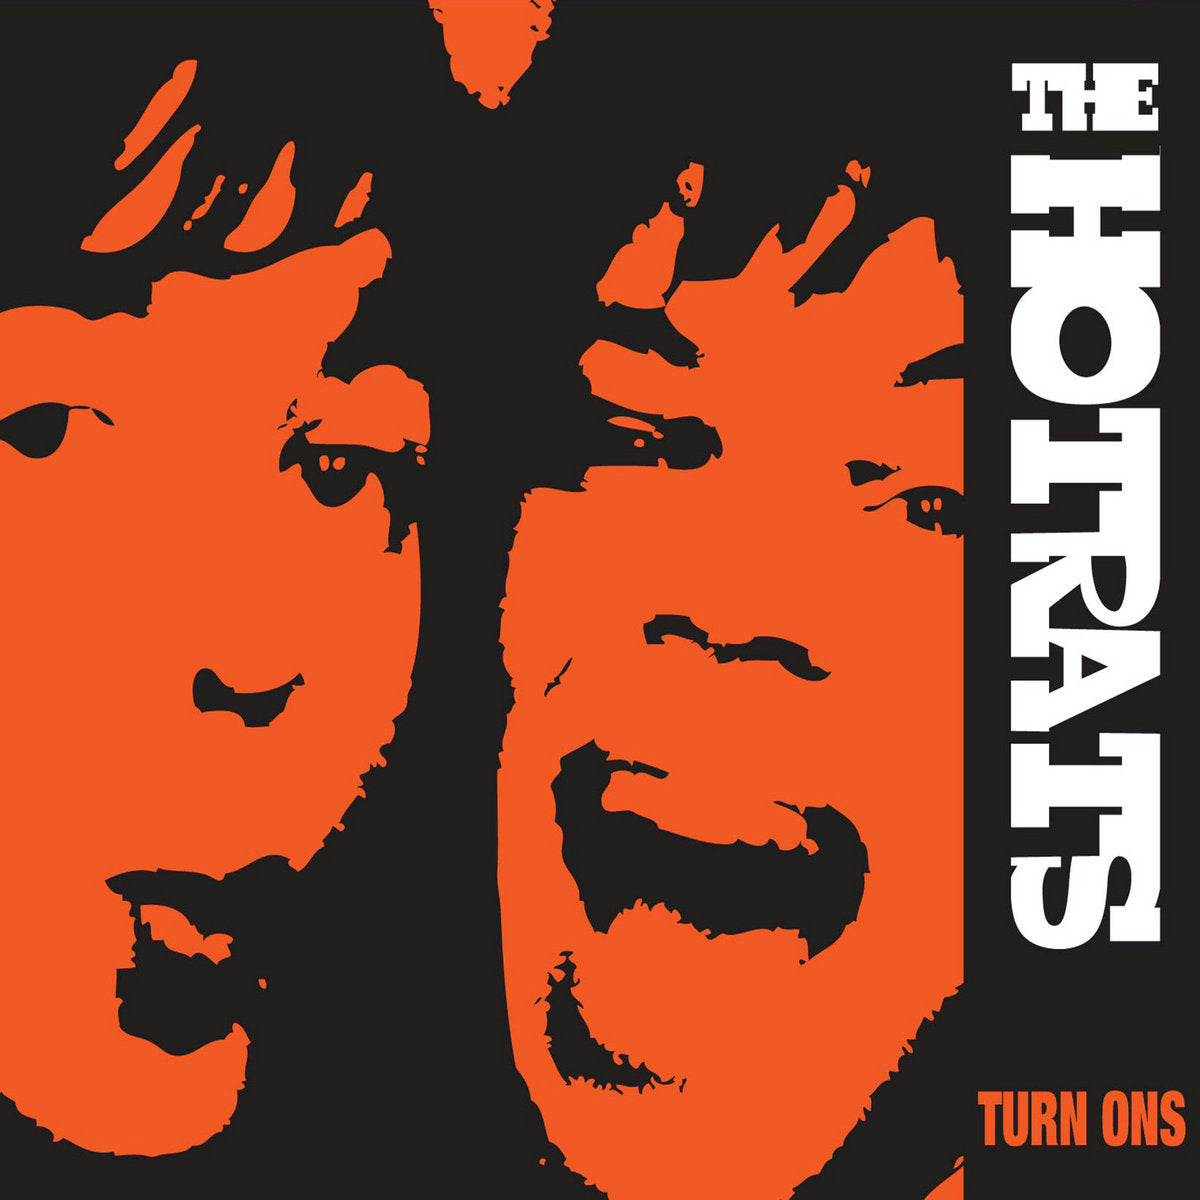 THE HOT RATS - Turn Ons - LP - 180g Clear Vinyl